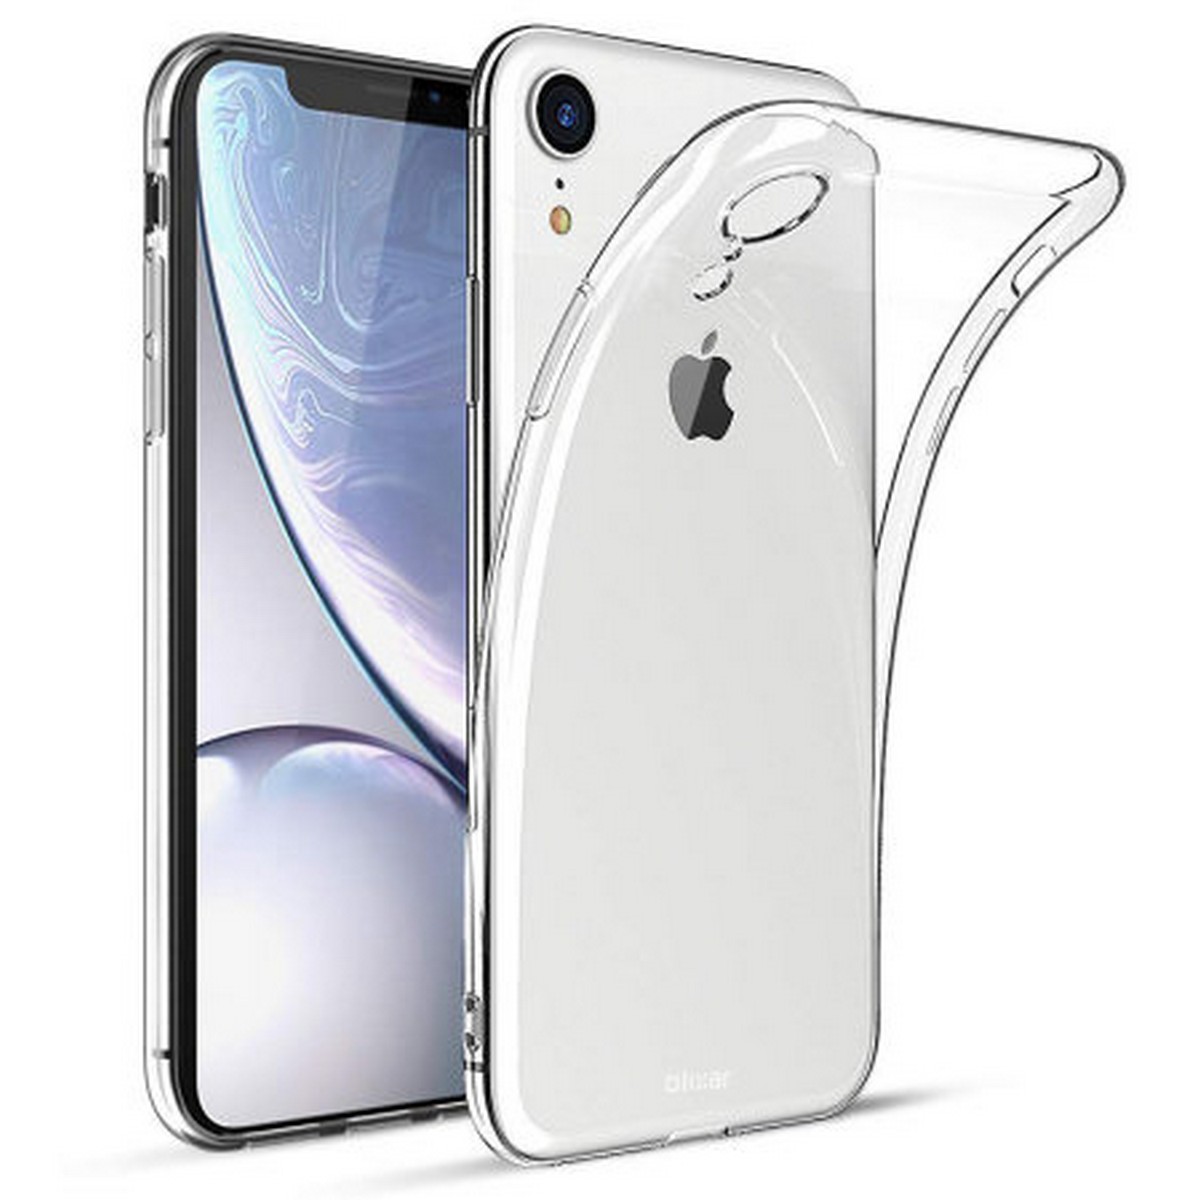 Apple Iphone Xr, Flexible Soft Slim Jelly Case Transparent Clear Tpu Cover